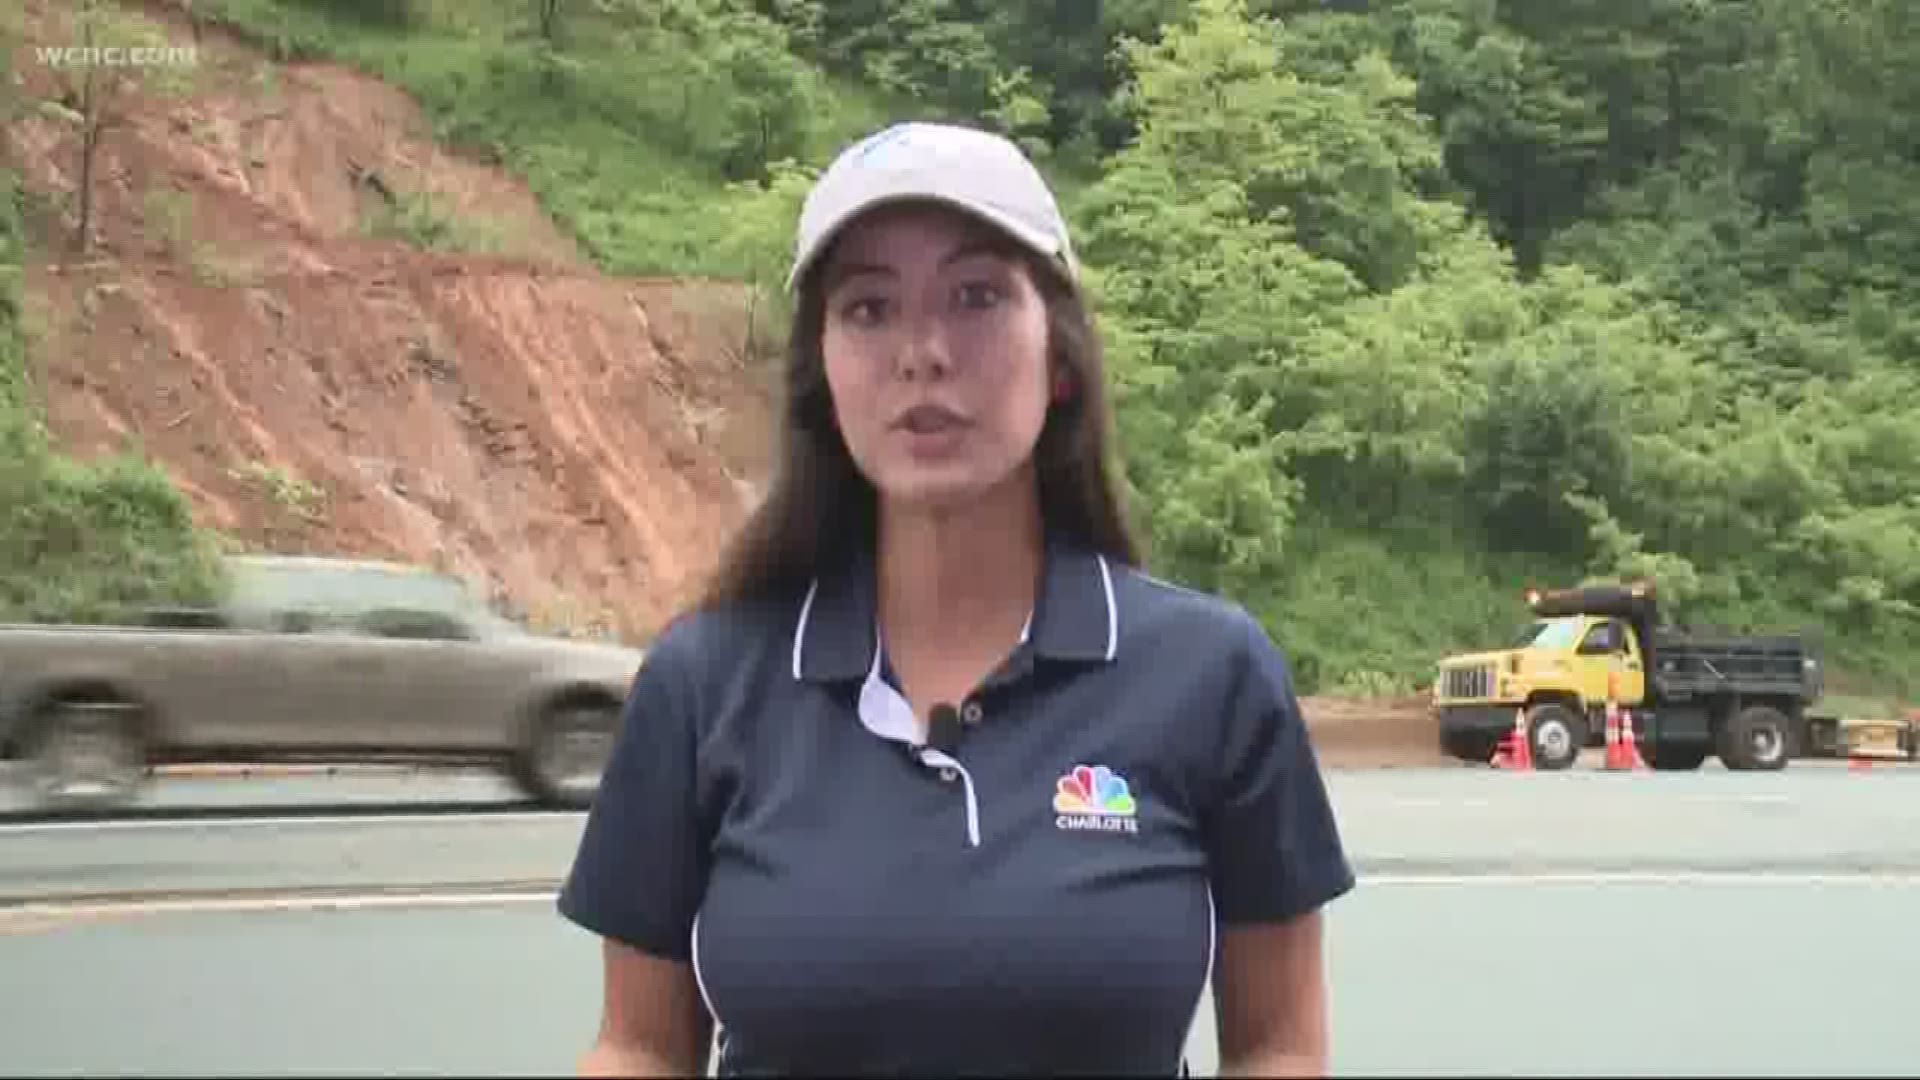 The mandatory evacuation order for thousands of people in McDowell County has been lifted after engineers determined the Lake Tahoma dam is safe.